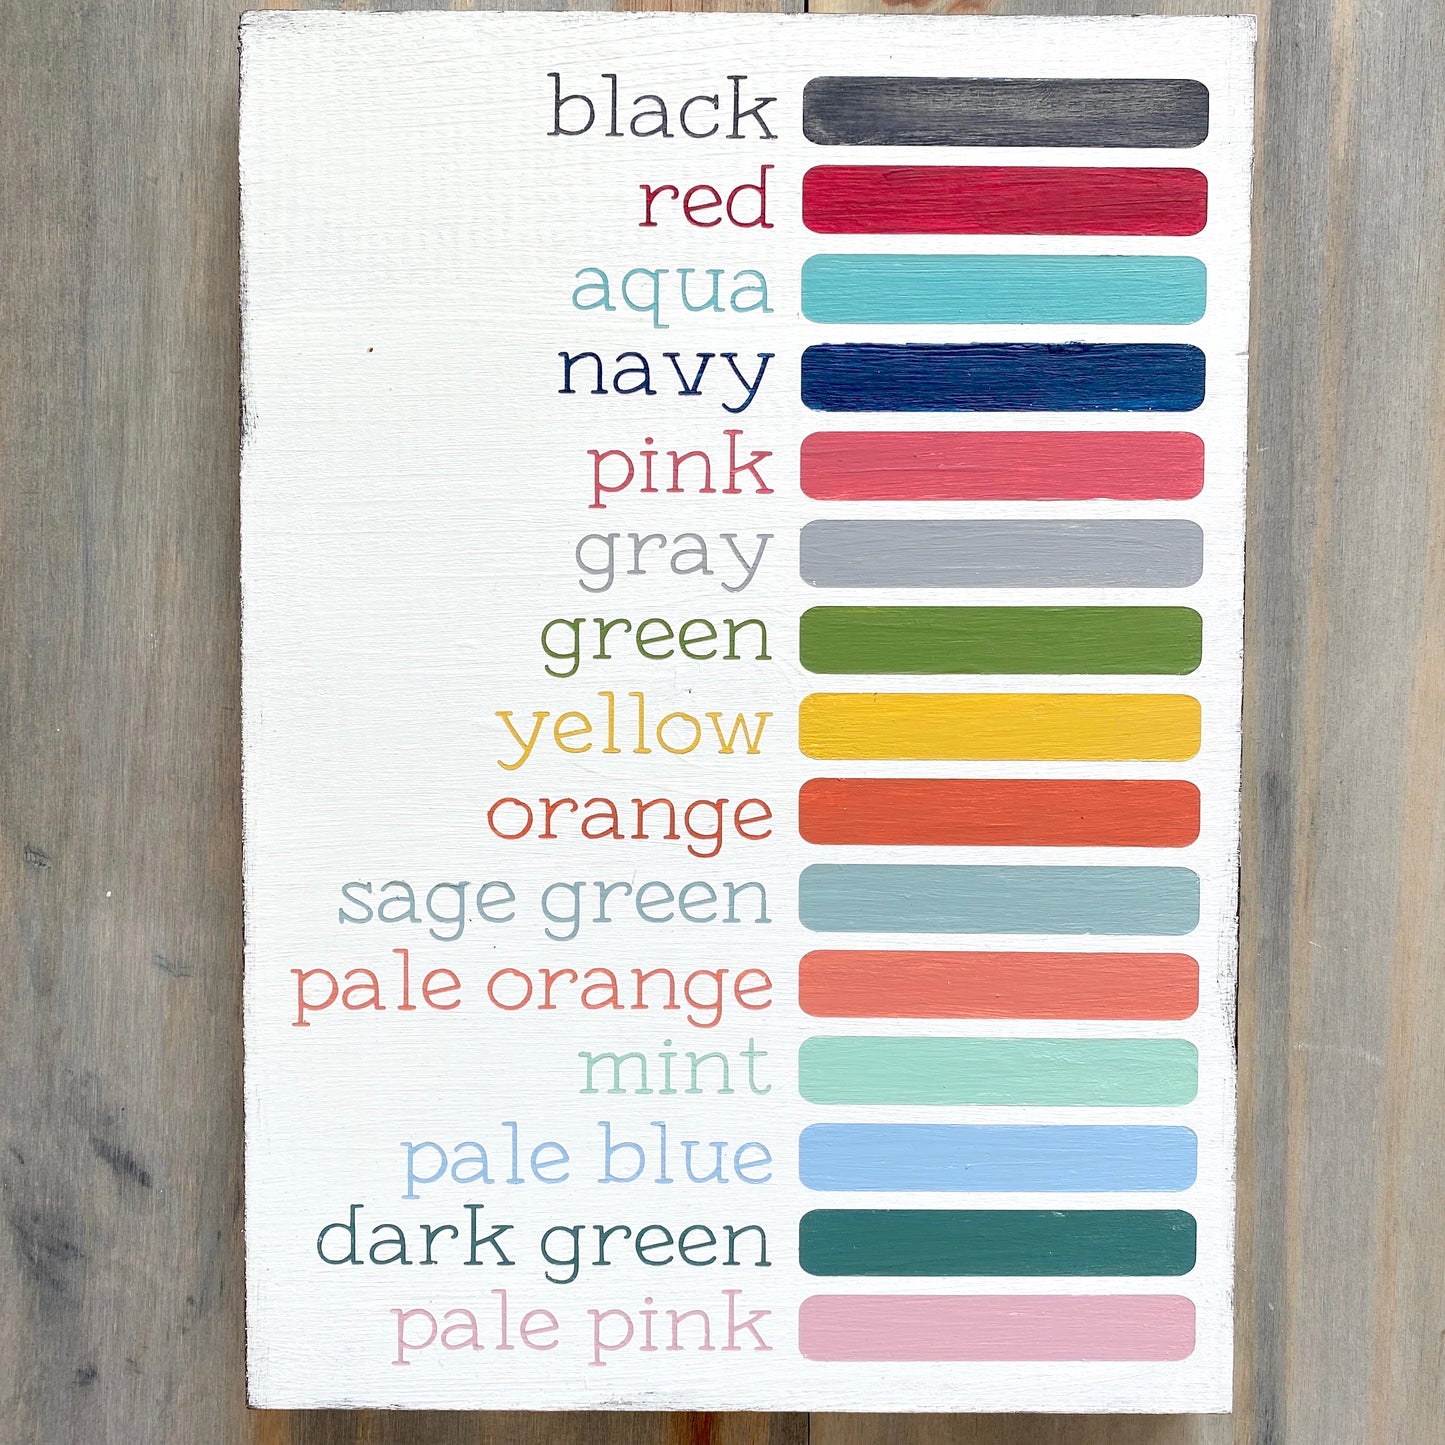 Anchored Soul color Display Photo with wood sign showing all available colors painted in words and color block - black, red, aqua, navy, pink, gray, green, yellow, orange, sage green, pale orange, mint, pale blue, dark green, pale pinkAnchored Soul color Display Photo with wood sign showing all available colors painted in words and color block - black, red, aqua, navy, pink, gray, green, yellow, orange, sage green, pale orange, mint, pale blue, dark green, pale pink